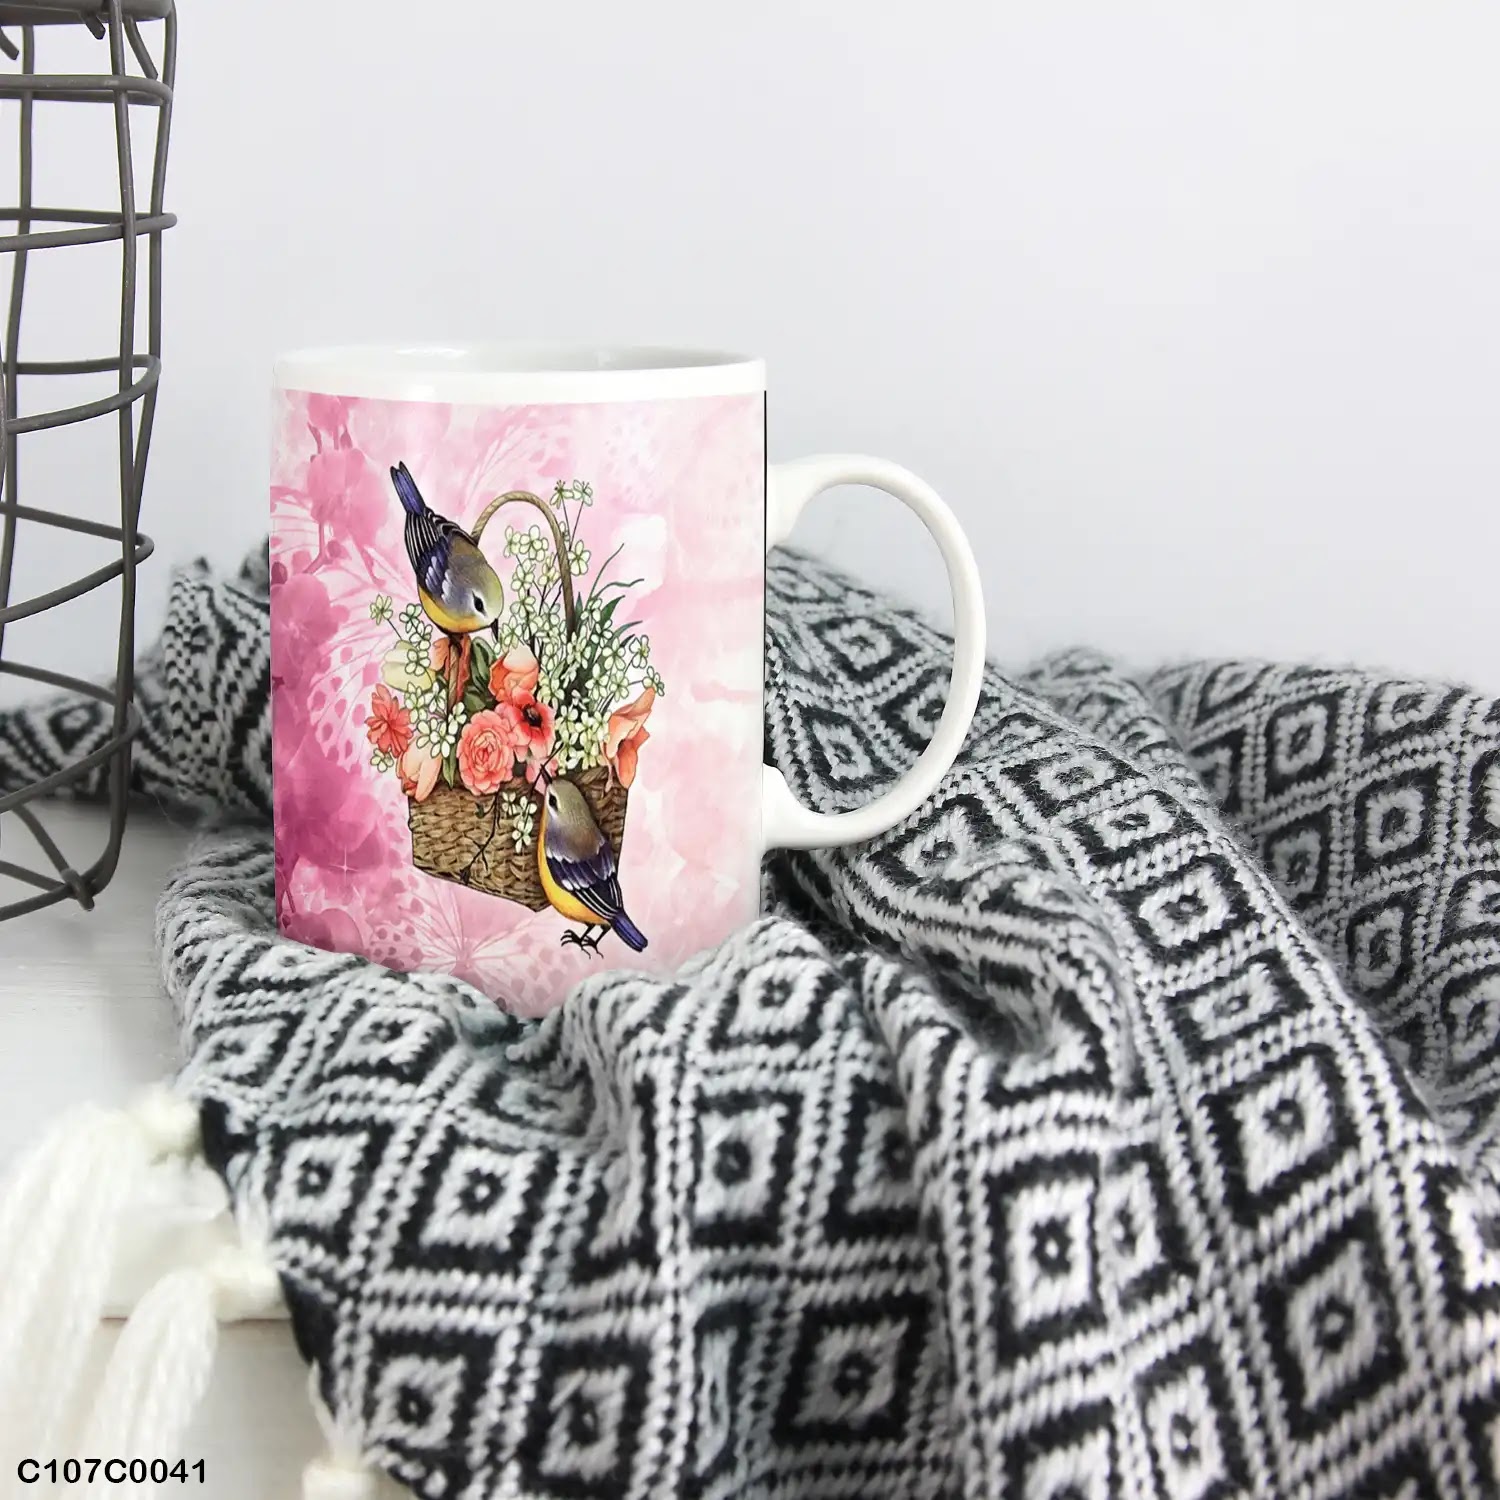 A pink mug (cup) printed with an image of flowers basket and birds